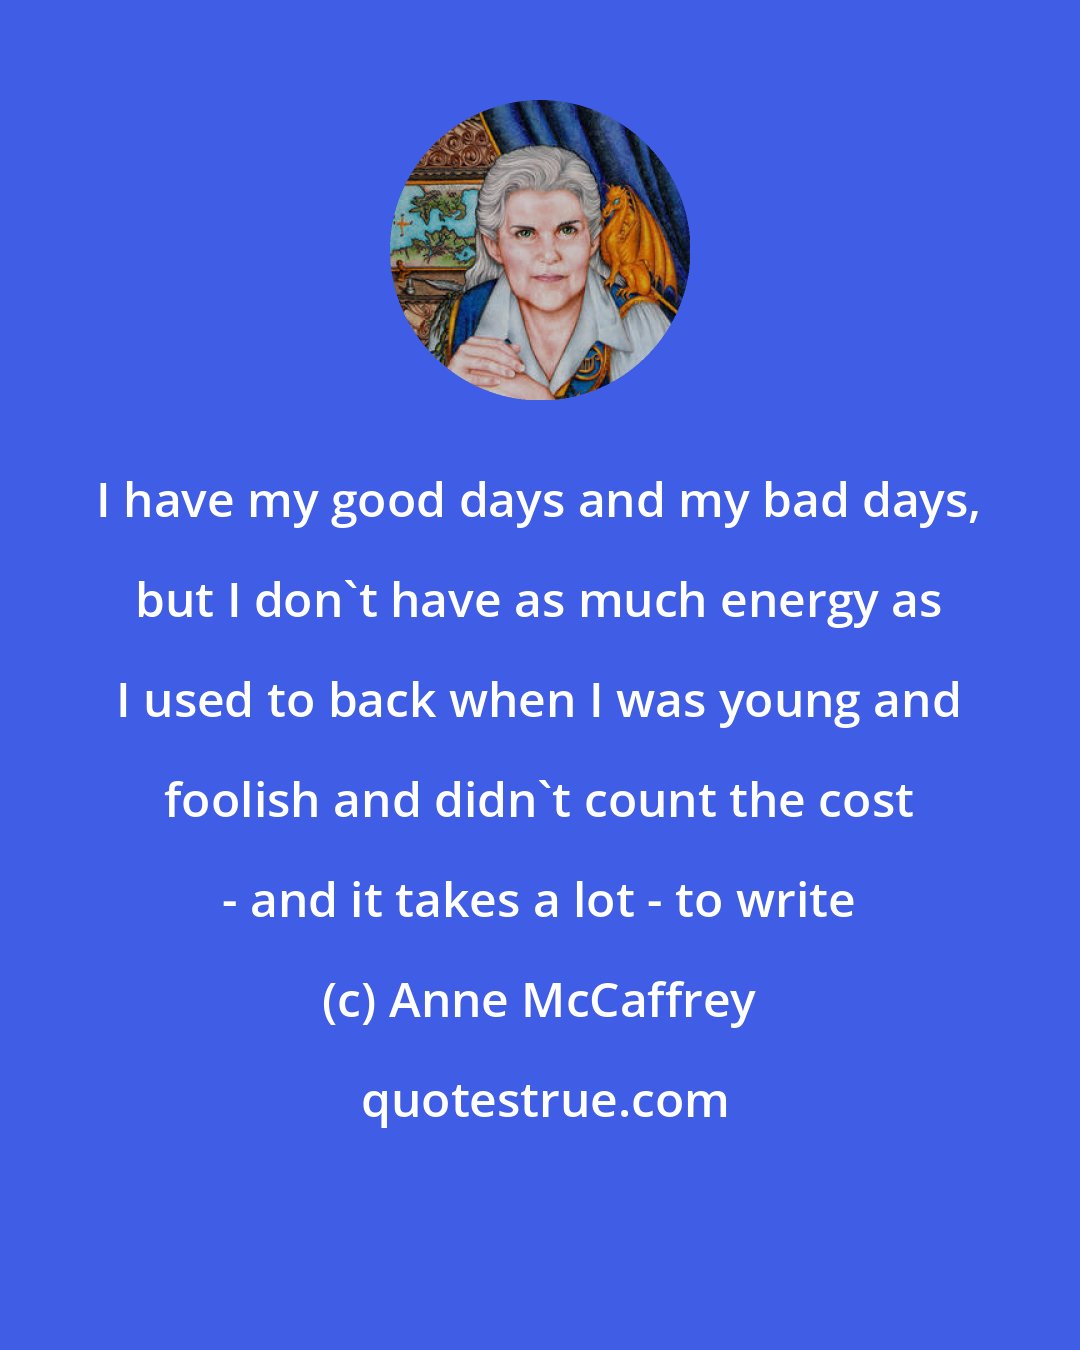 Anne McCaffrey: I have my good days and my bad days, but I don't have as much energy as I used to back when I was young and foolish and didn't count the cost - and it takes a lot - to write